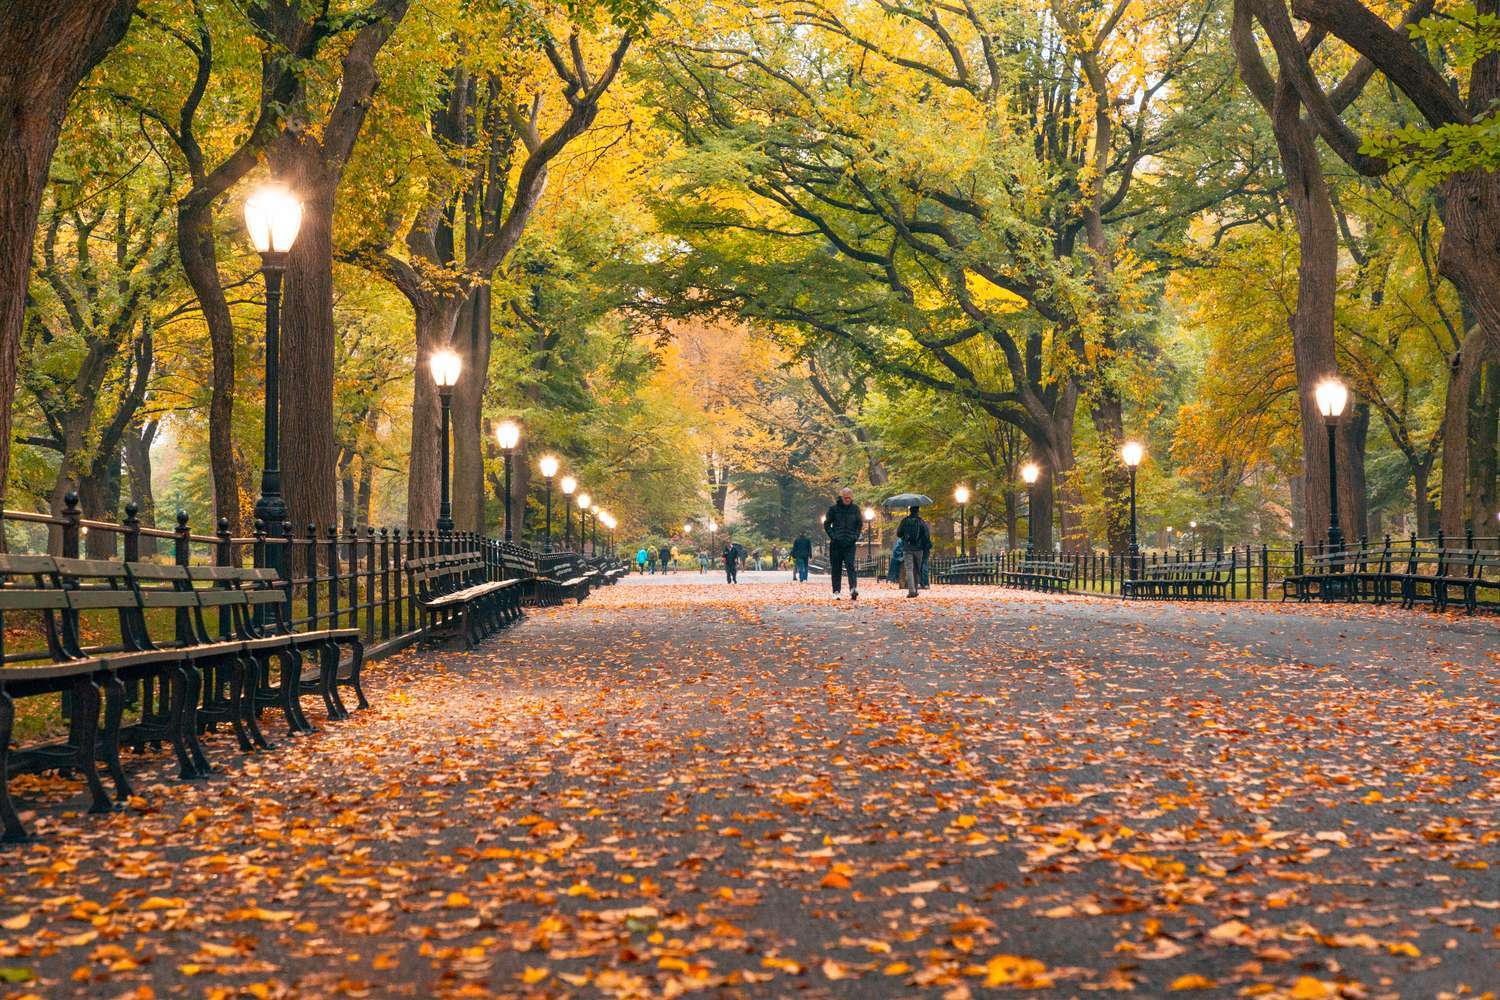 5 Best Walks to Experience Fall Foliage in NYC